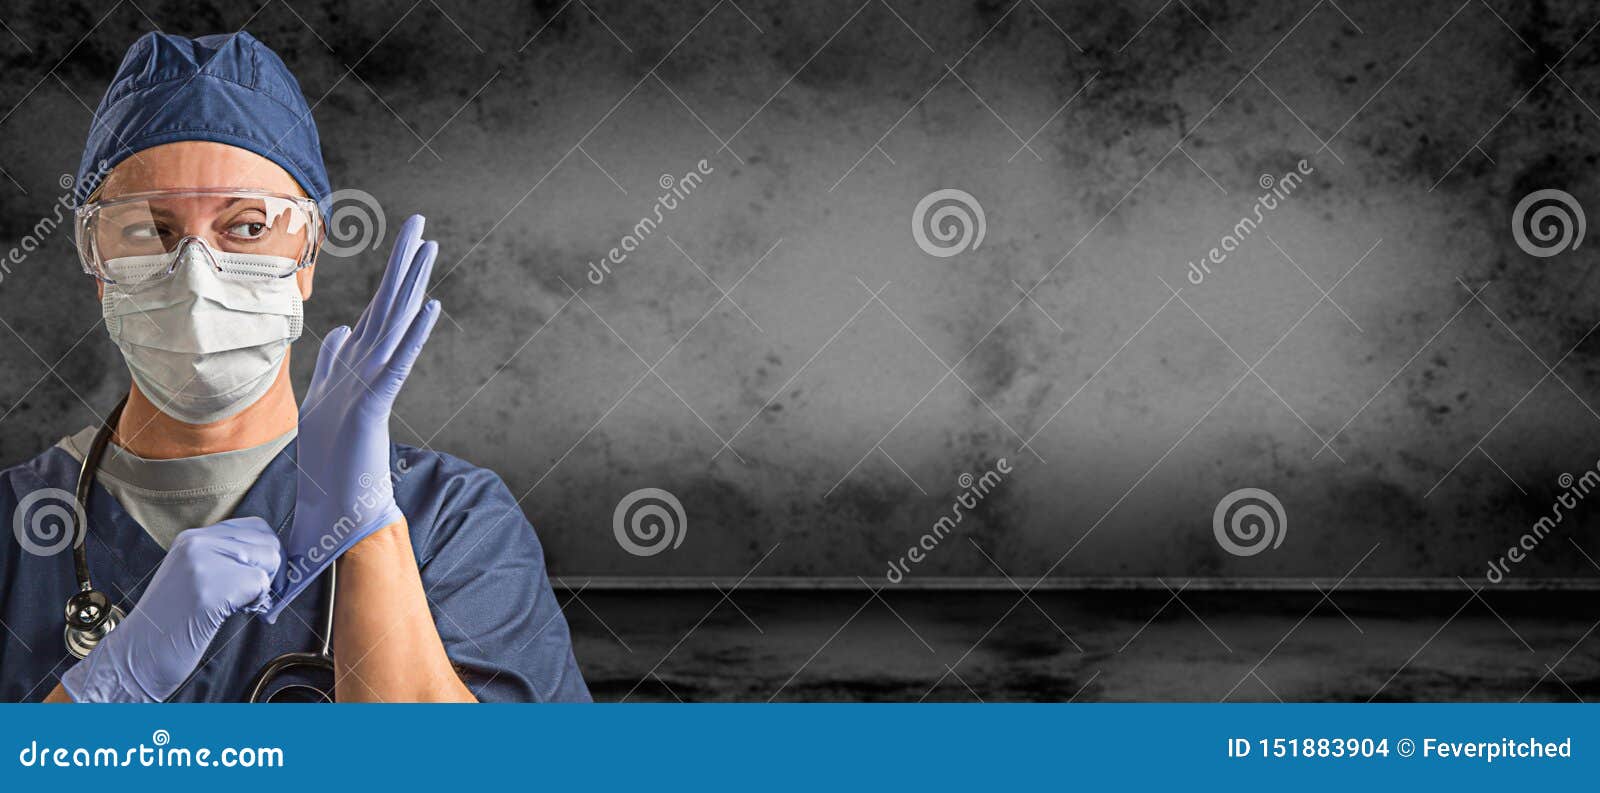 female doctor or nurse wearing goggles, surgical gloves and face mask against grungy dark background banner